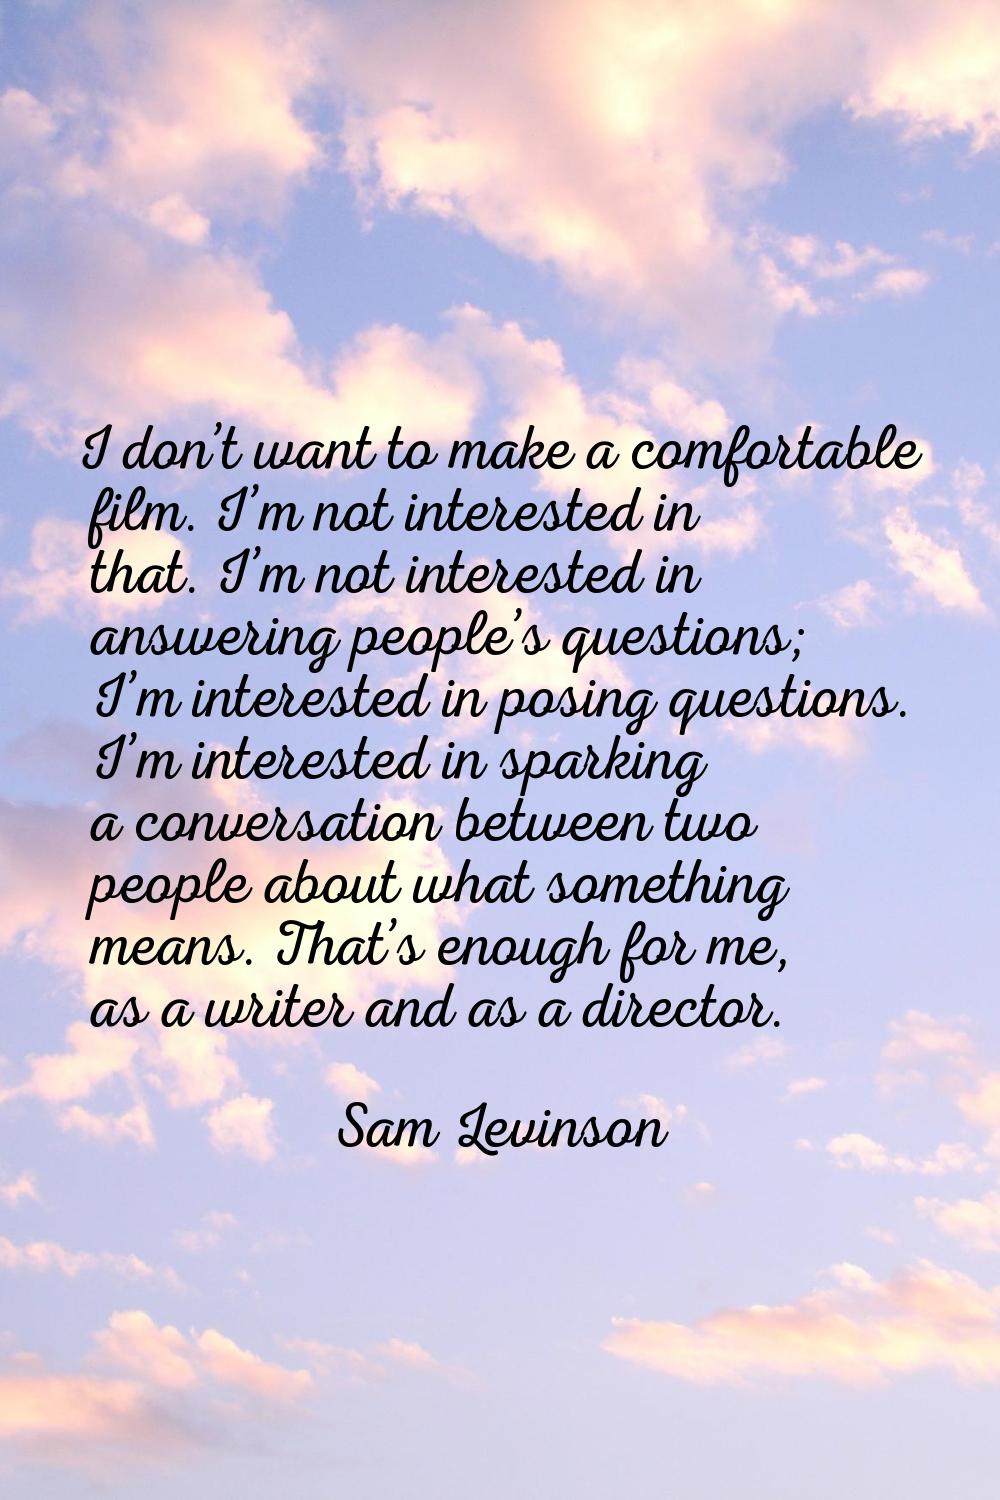 I don’t want to make a comfortable film. I’m not interested in that. I’m not interested in answerin